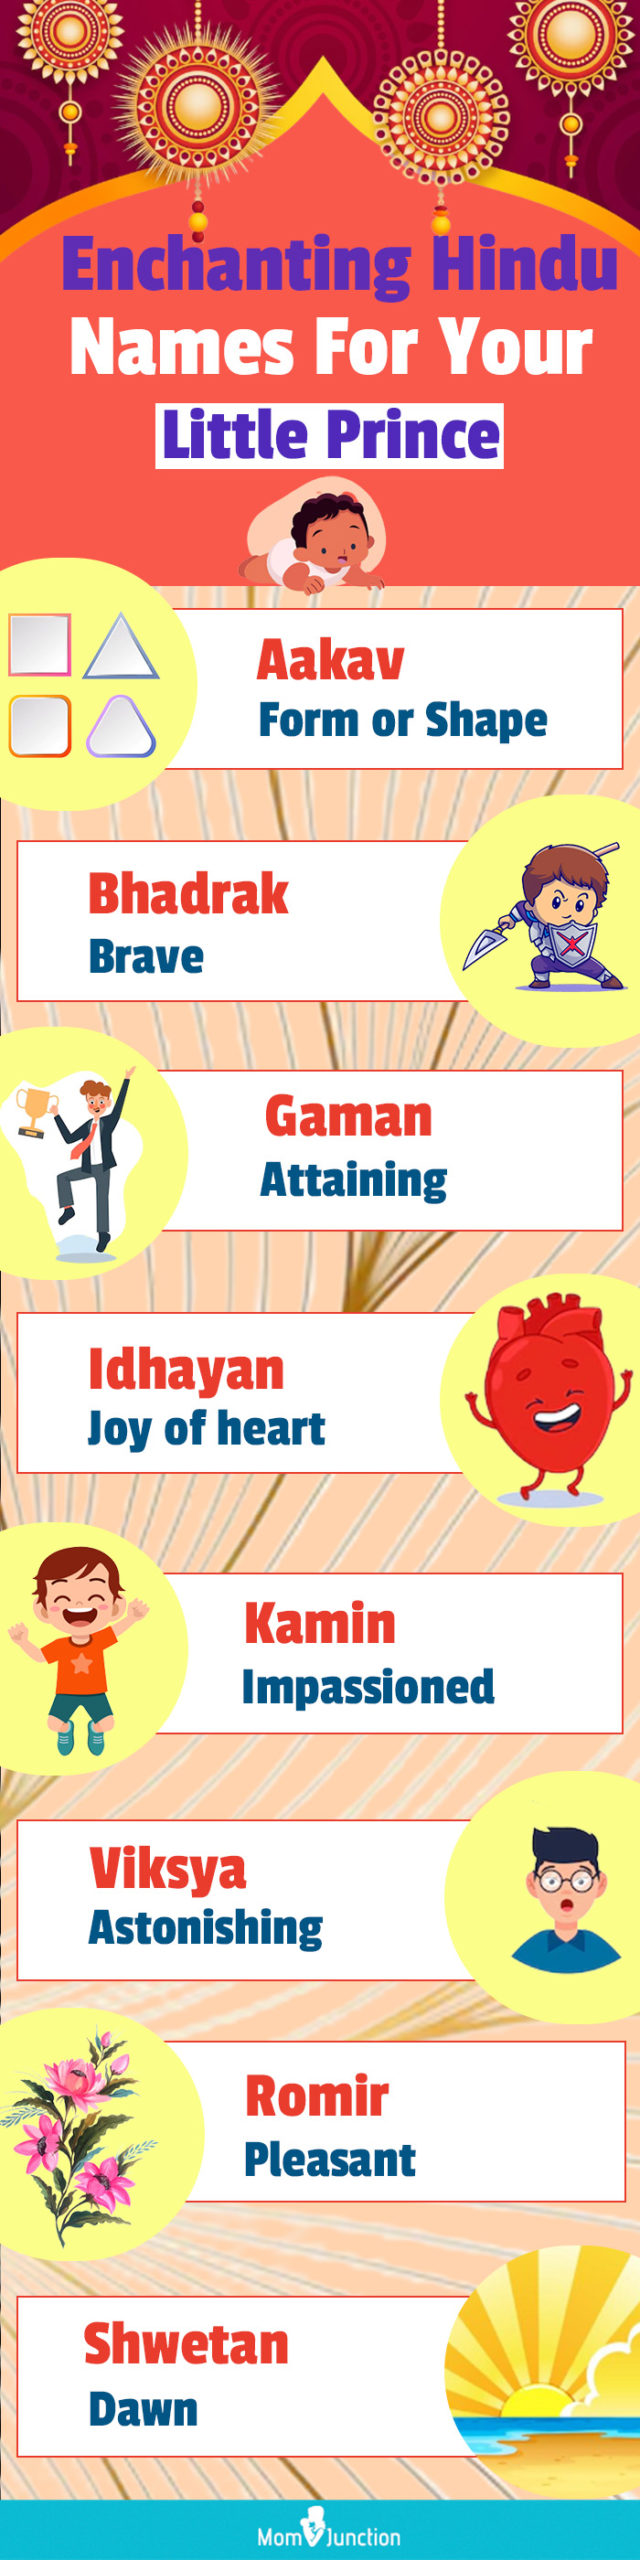 enchanting hindu names for your little prince (infographic)